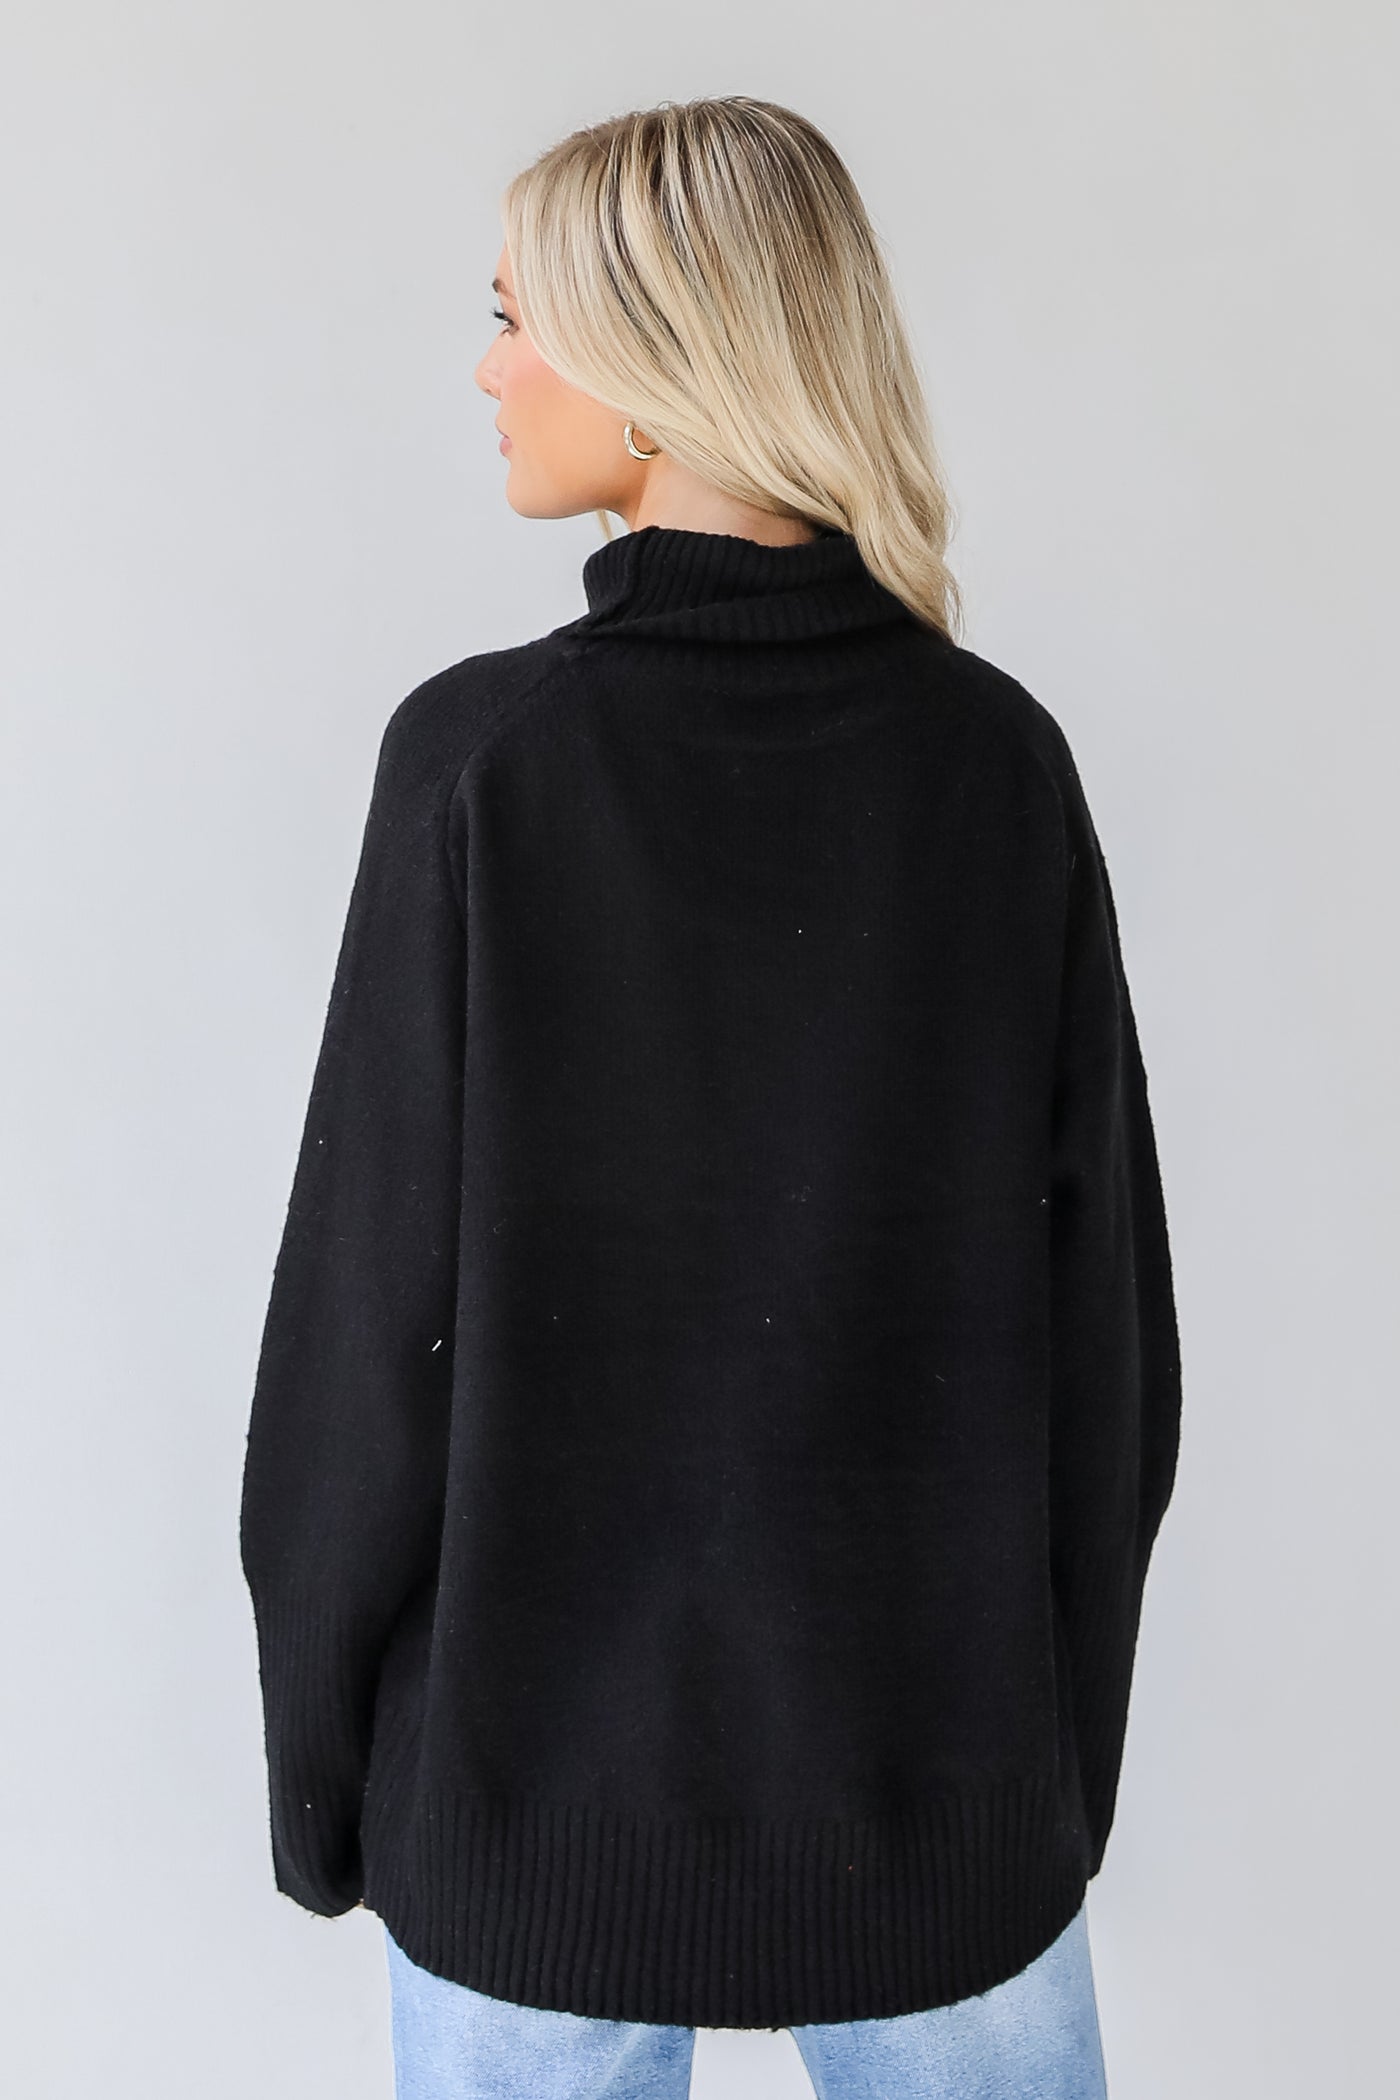 Turtleneck Sweater in black back view